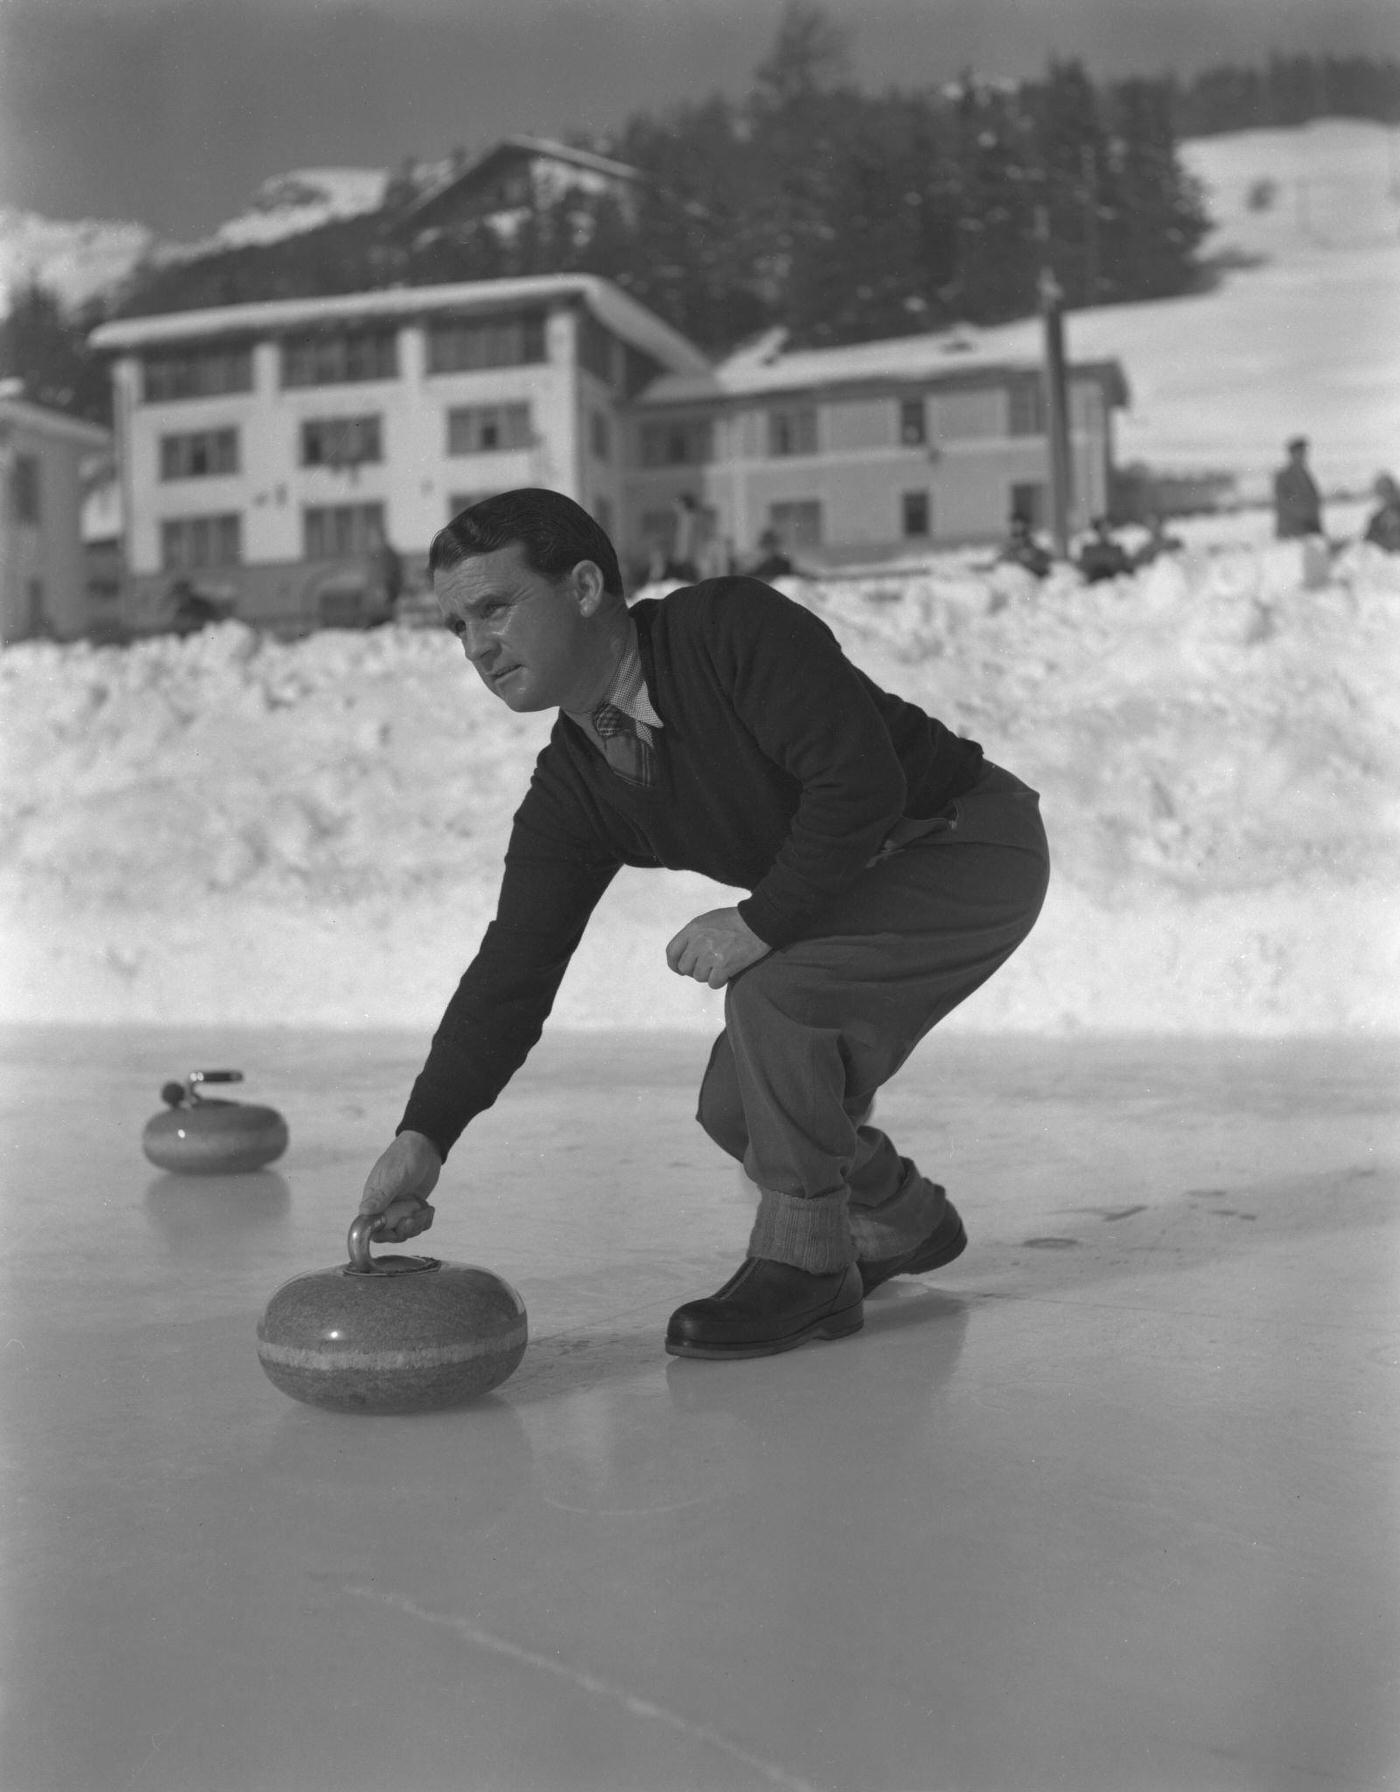 Curling Game on ice in St Moritz fot the Winter Olympics Games, 1950s.